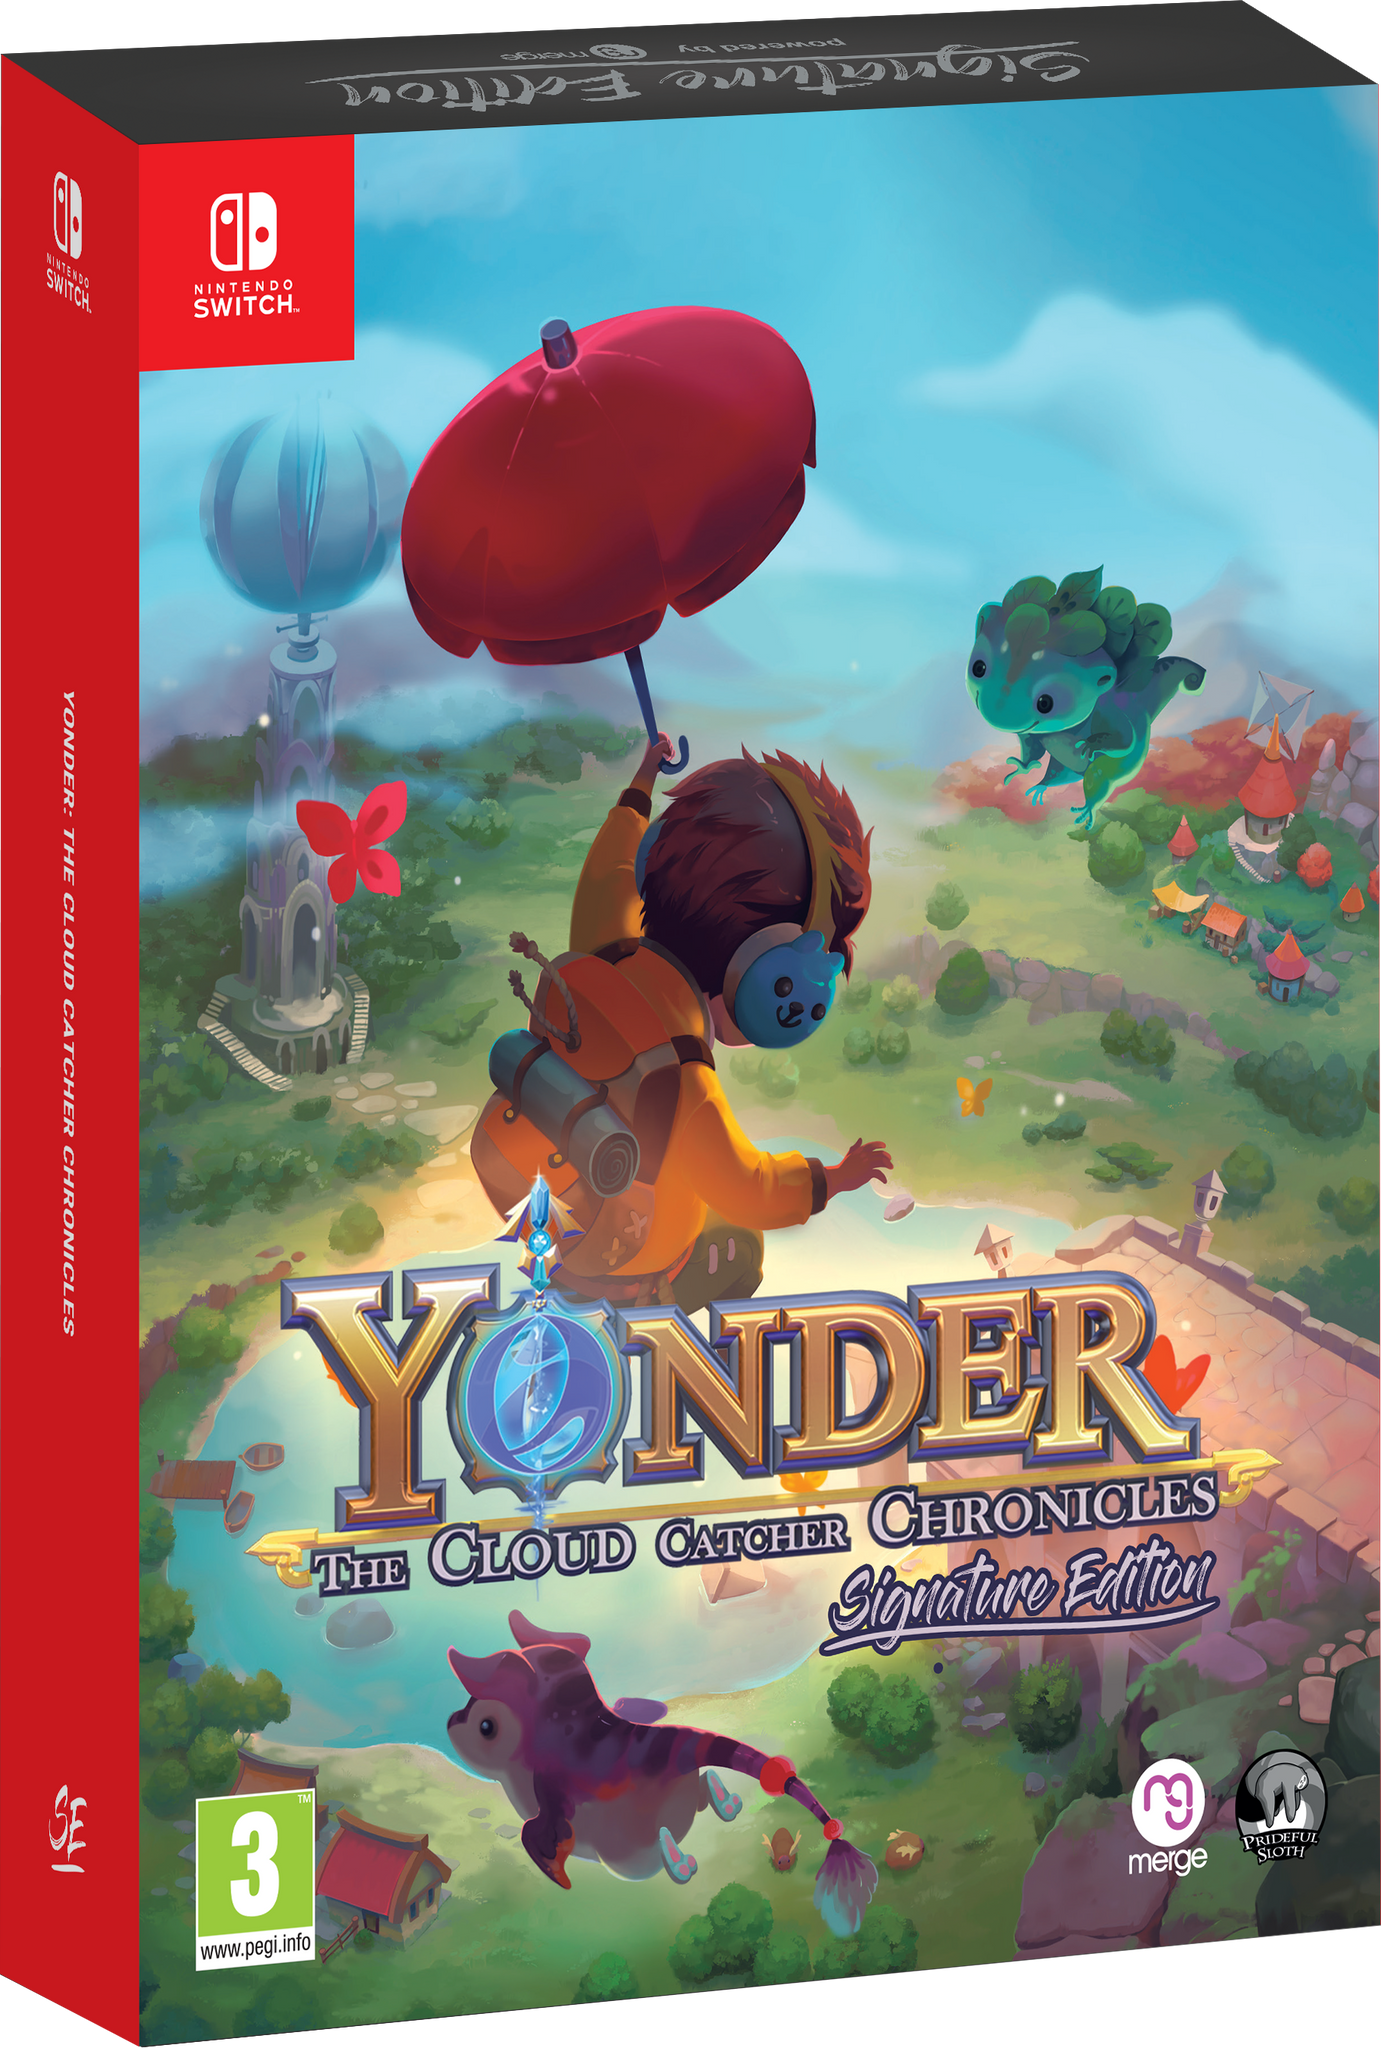 Yonder: The Cloud Catcher Chronicles - New Signature Edition (Switch) –  Signature Edition Games